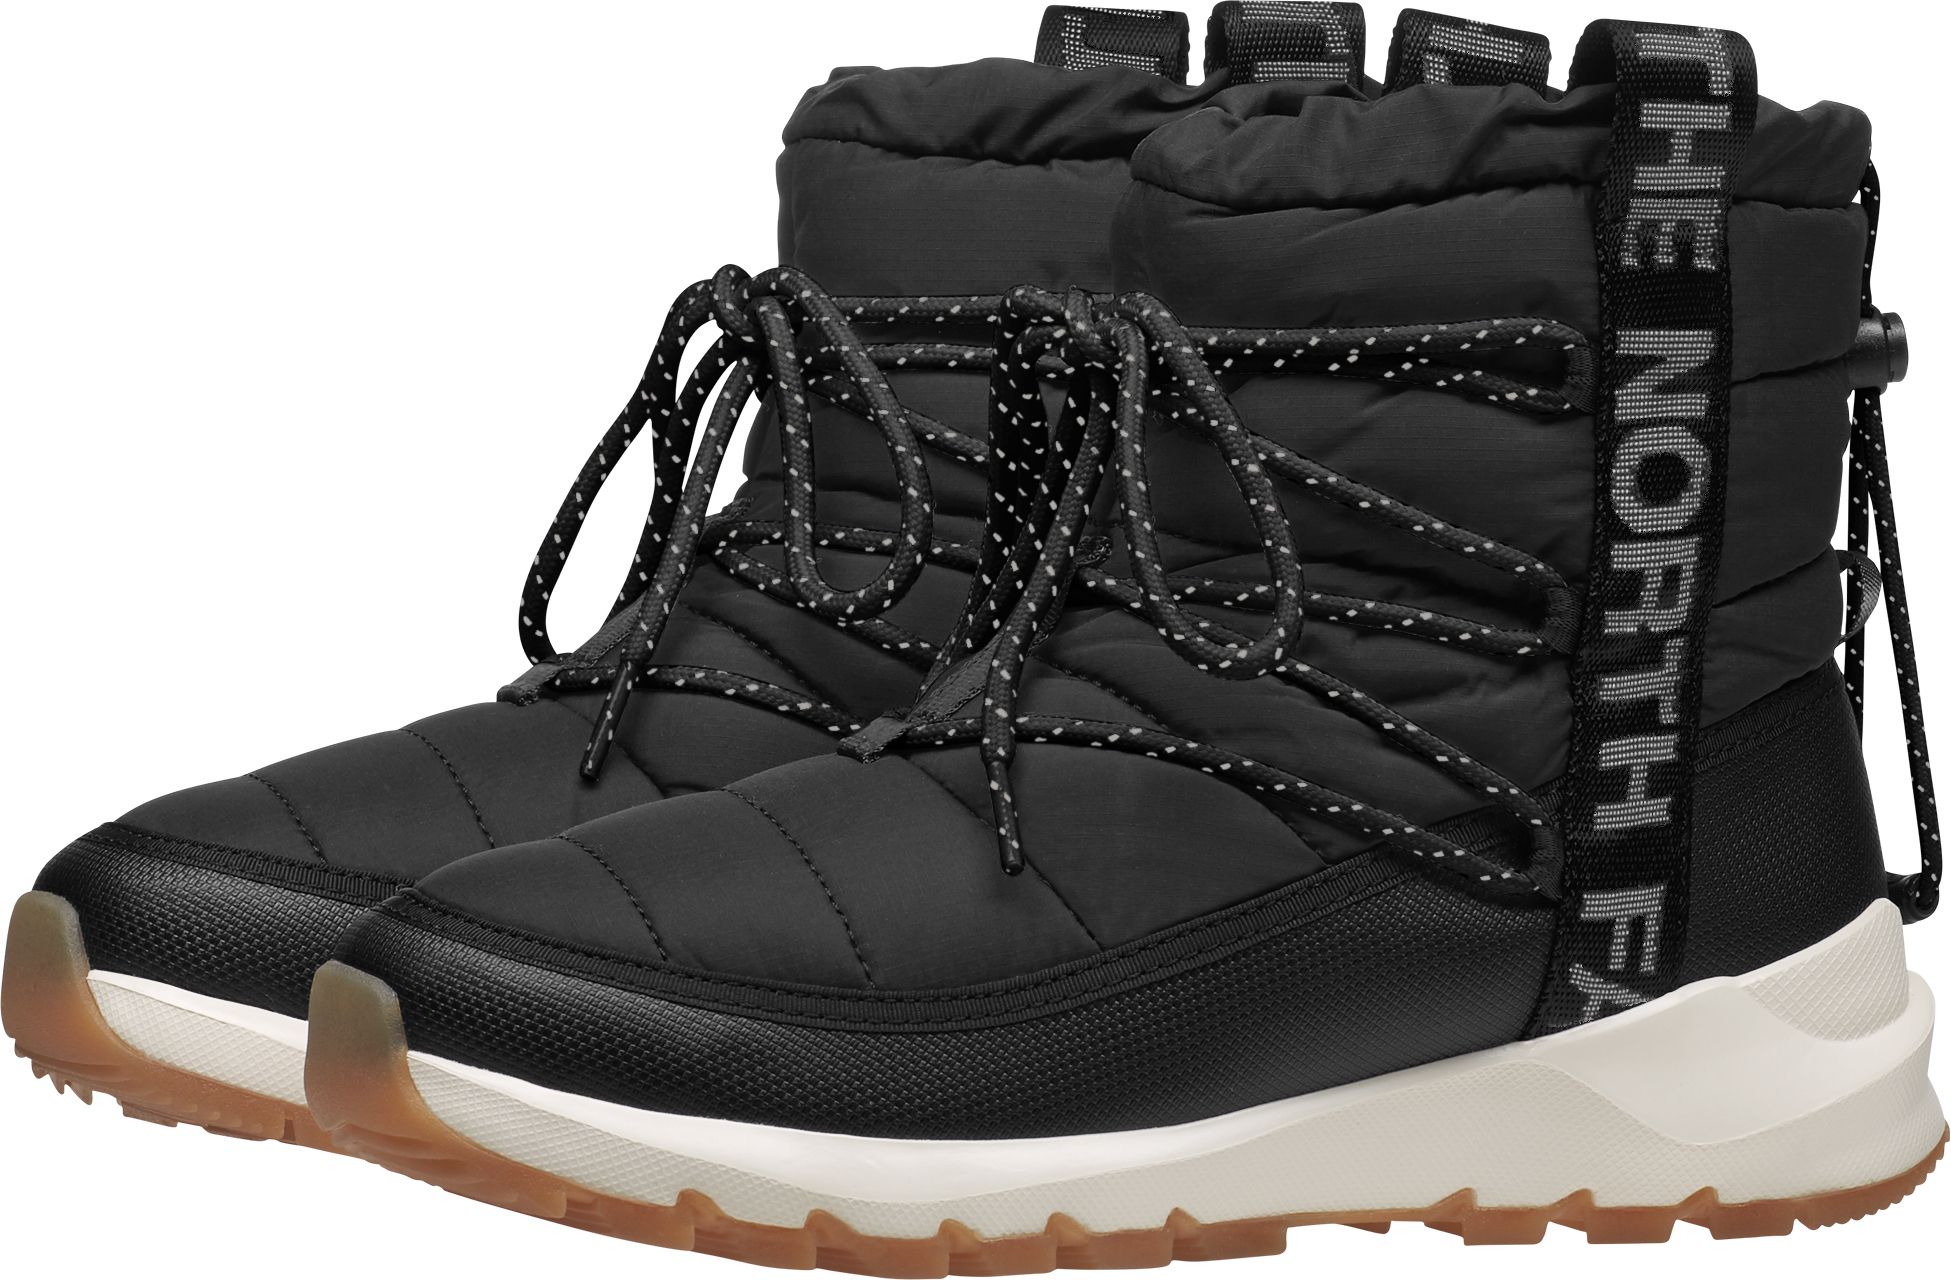 north face boots womens